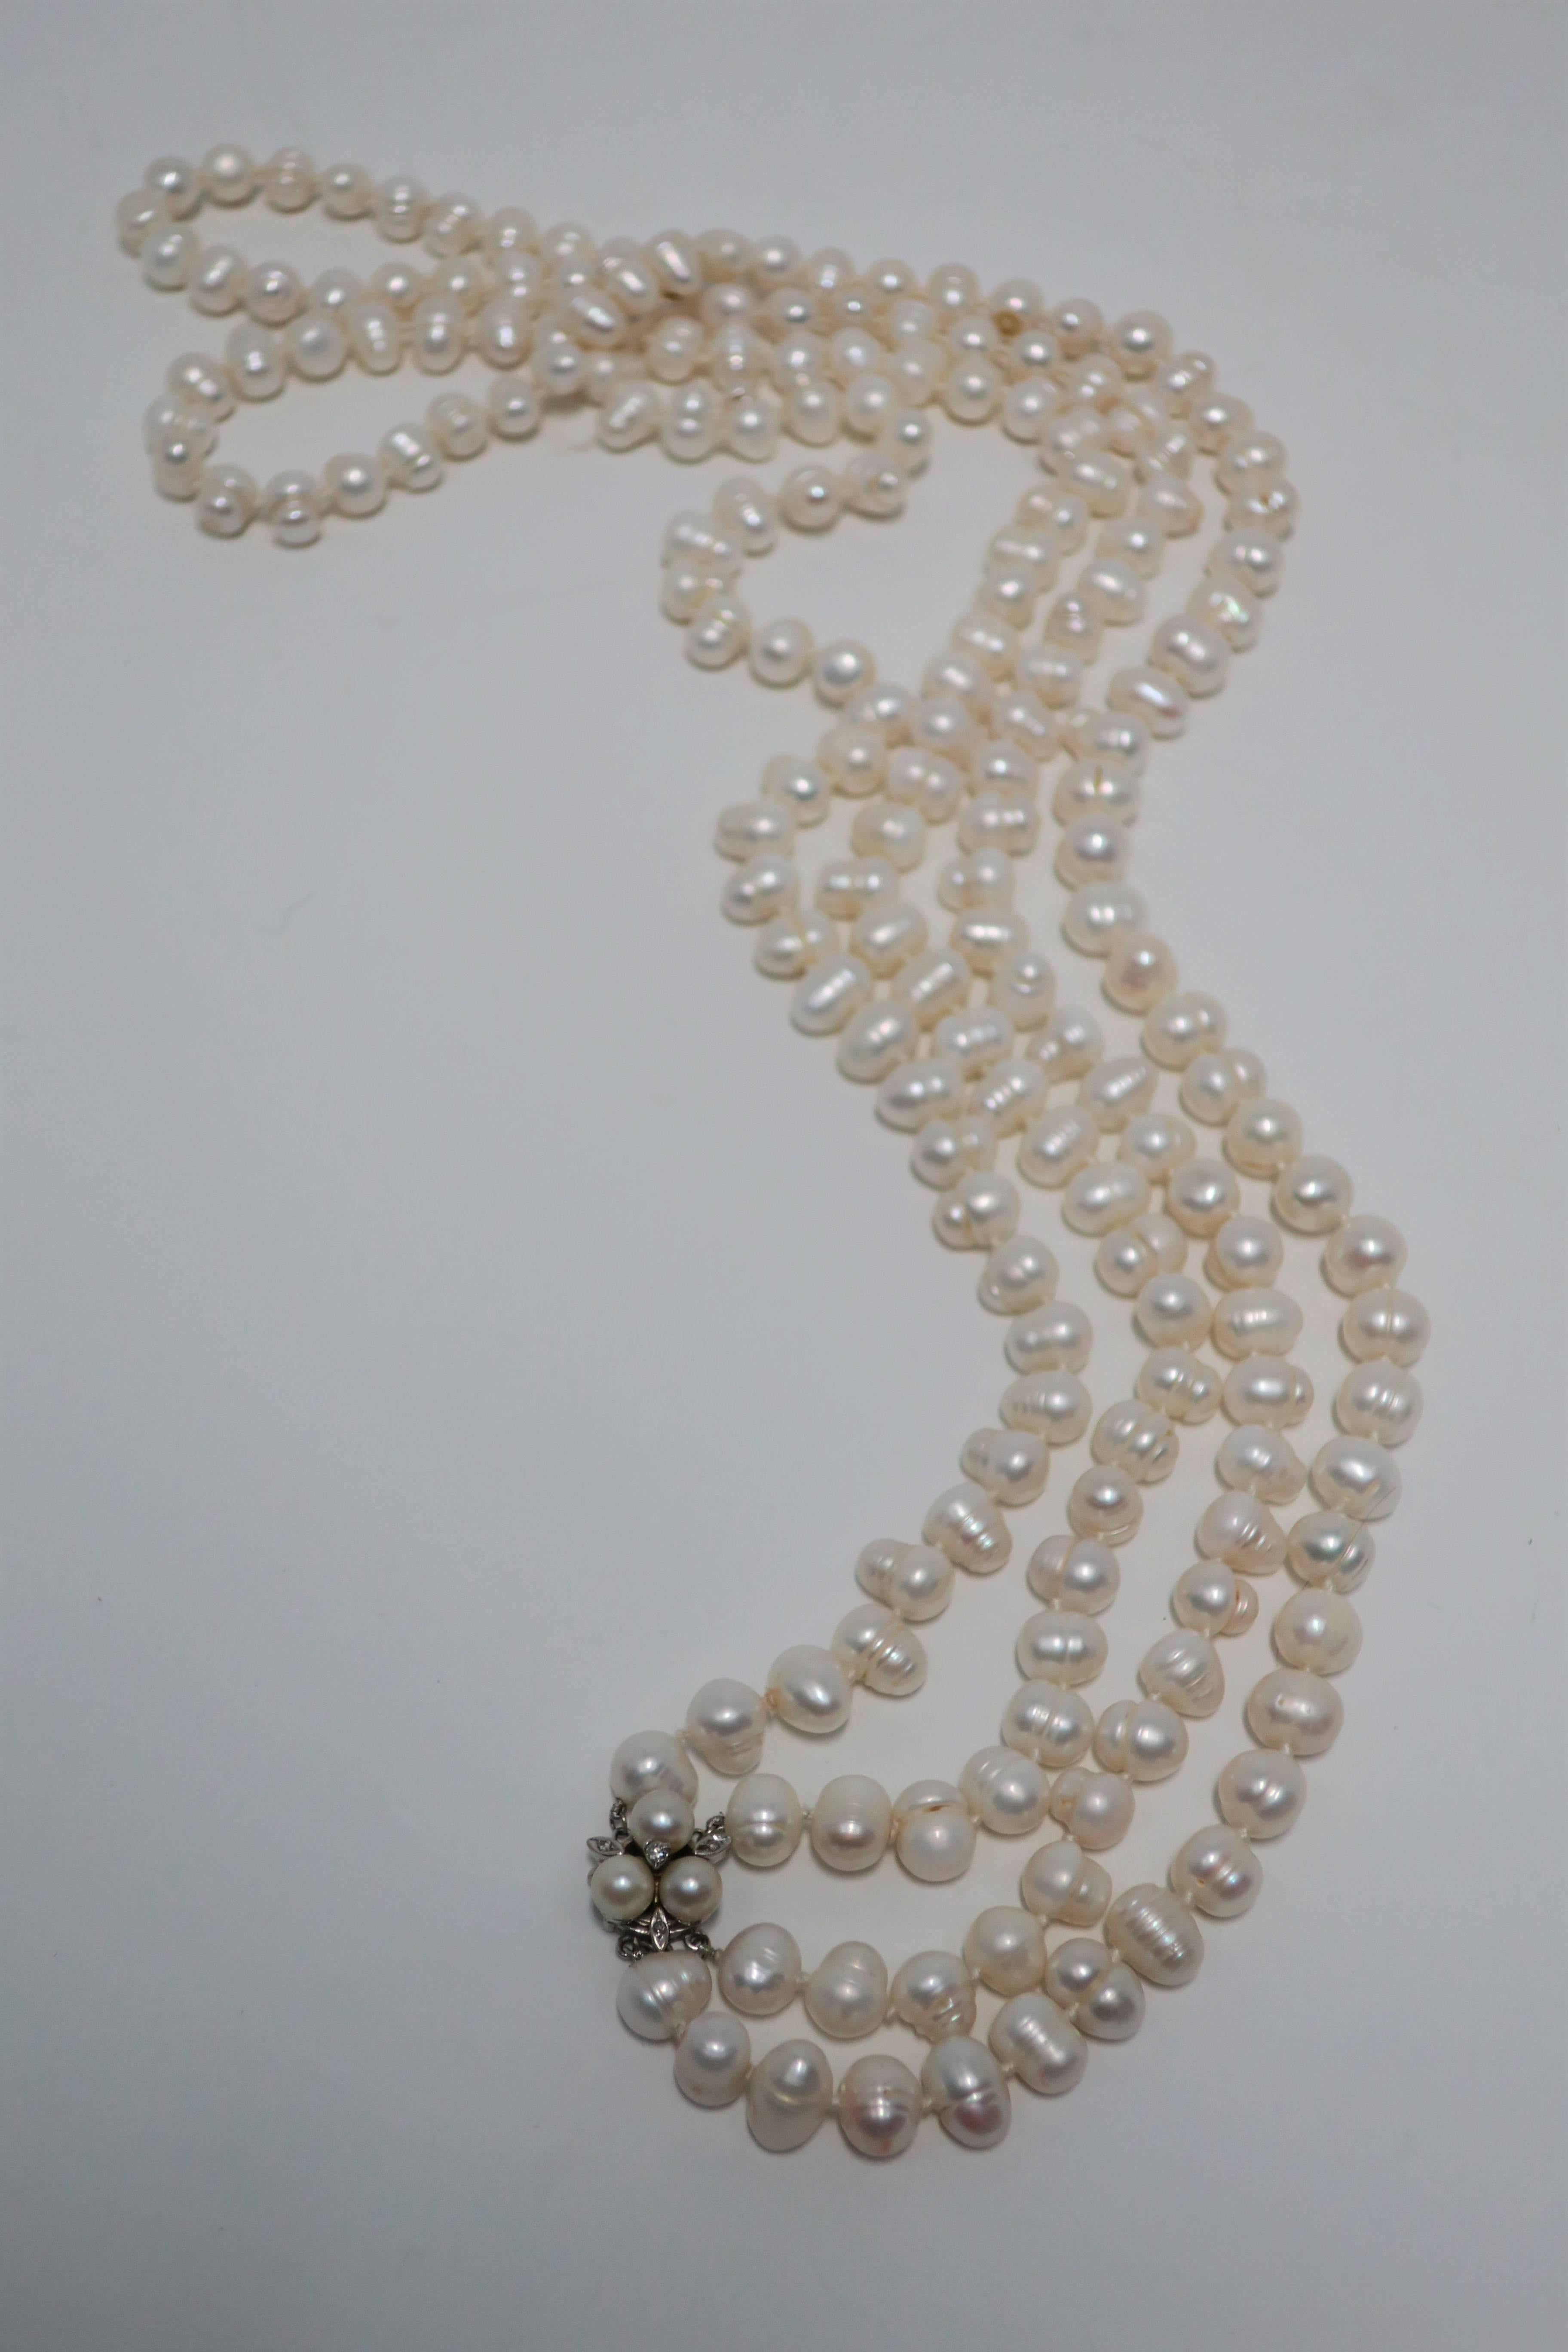 A beautiful long double strand real natural freshwater pearl necklace, with a vintage 14-karat white gold, cultured pearl, and diamond clasp. This natural freshwater pearl necklace is beautifully strung with knotting in-between each pearl. Vintage